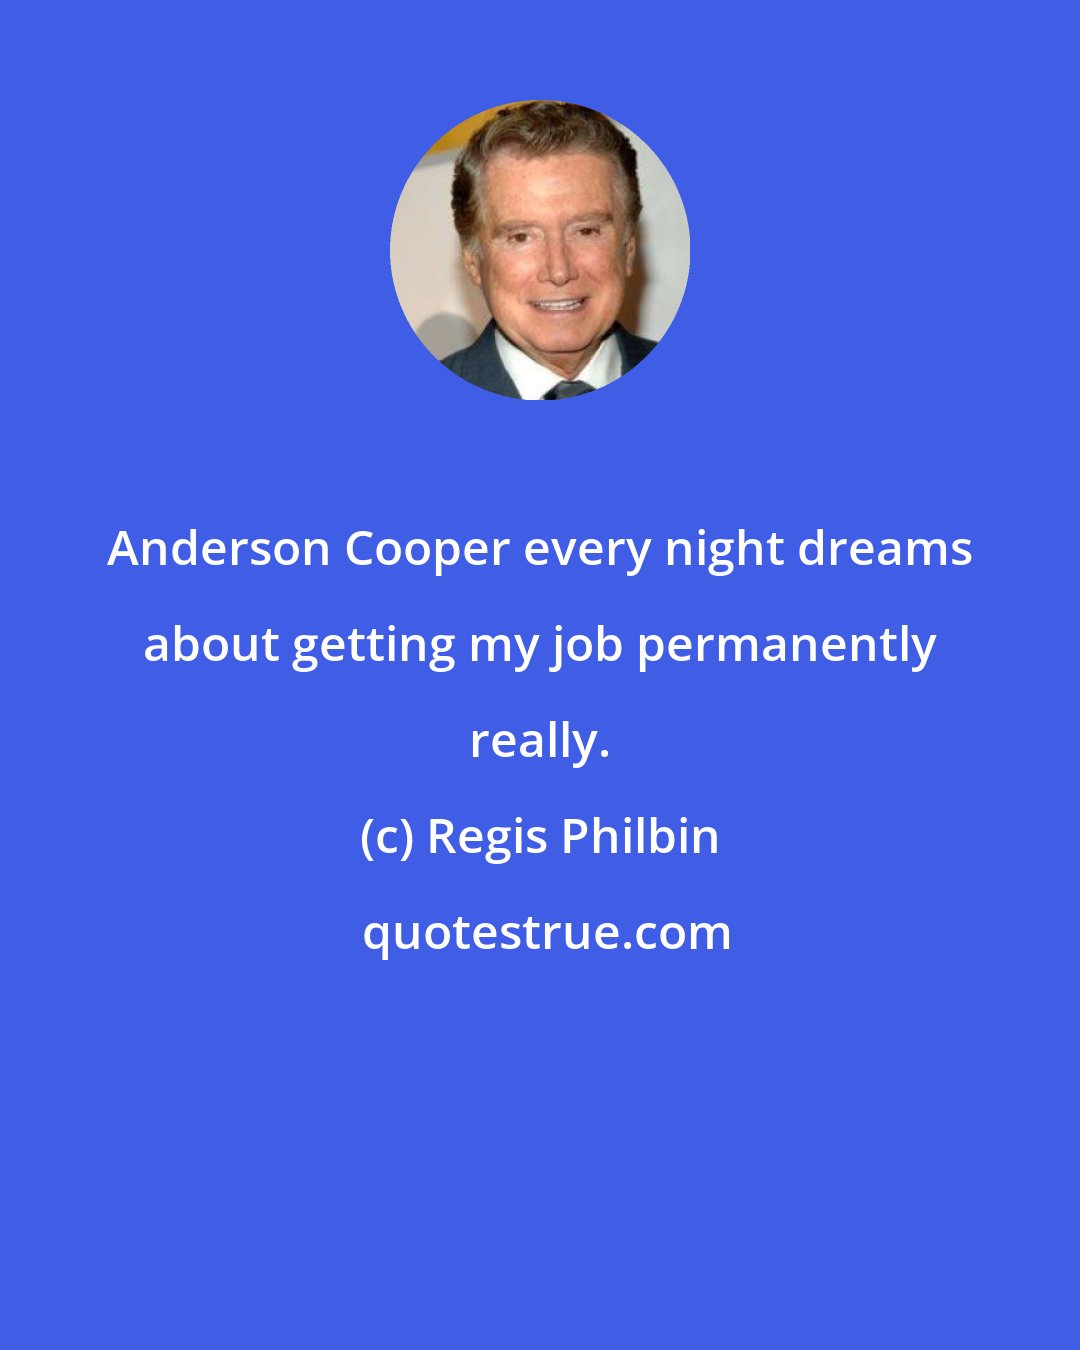 Regis Philbin: Anderson Cooper every night dreams about getting my job permanently really.